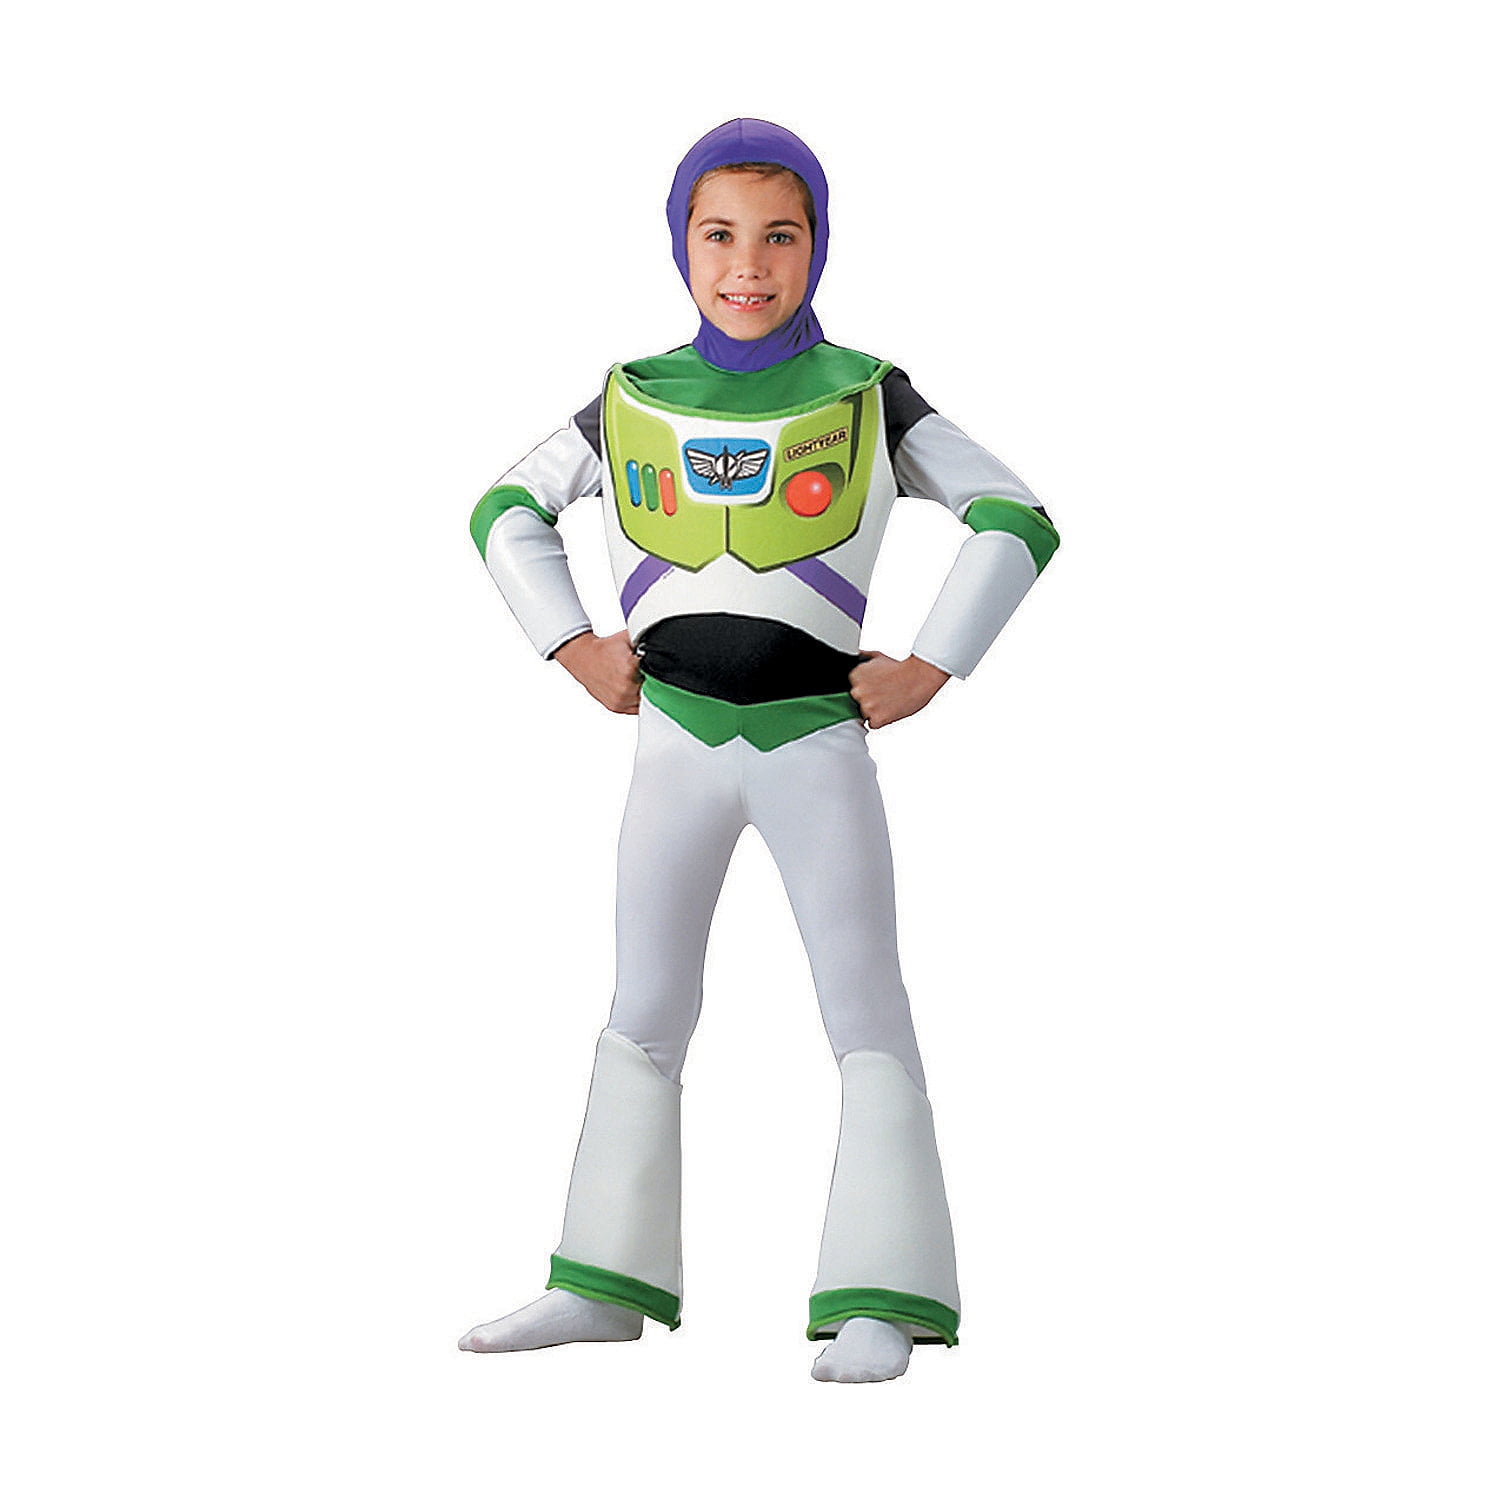 Pop! Disney: Toy Story 4 - Buzz Lightyear Floating,  Exclusive –  Star's Toy Shop